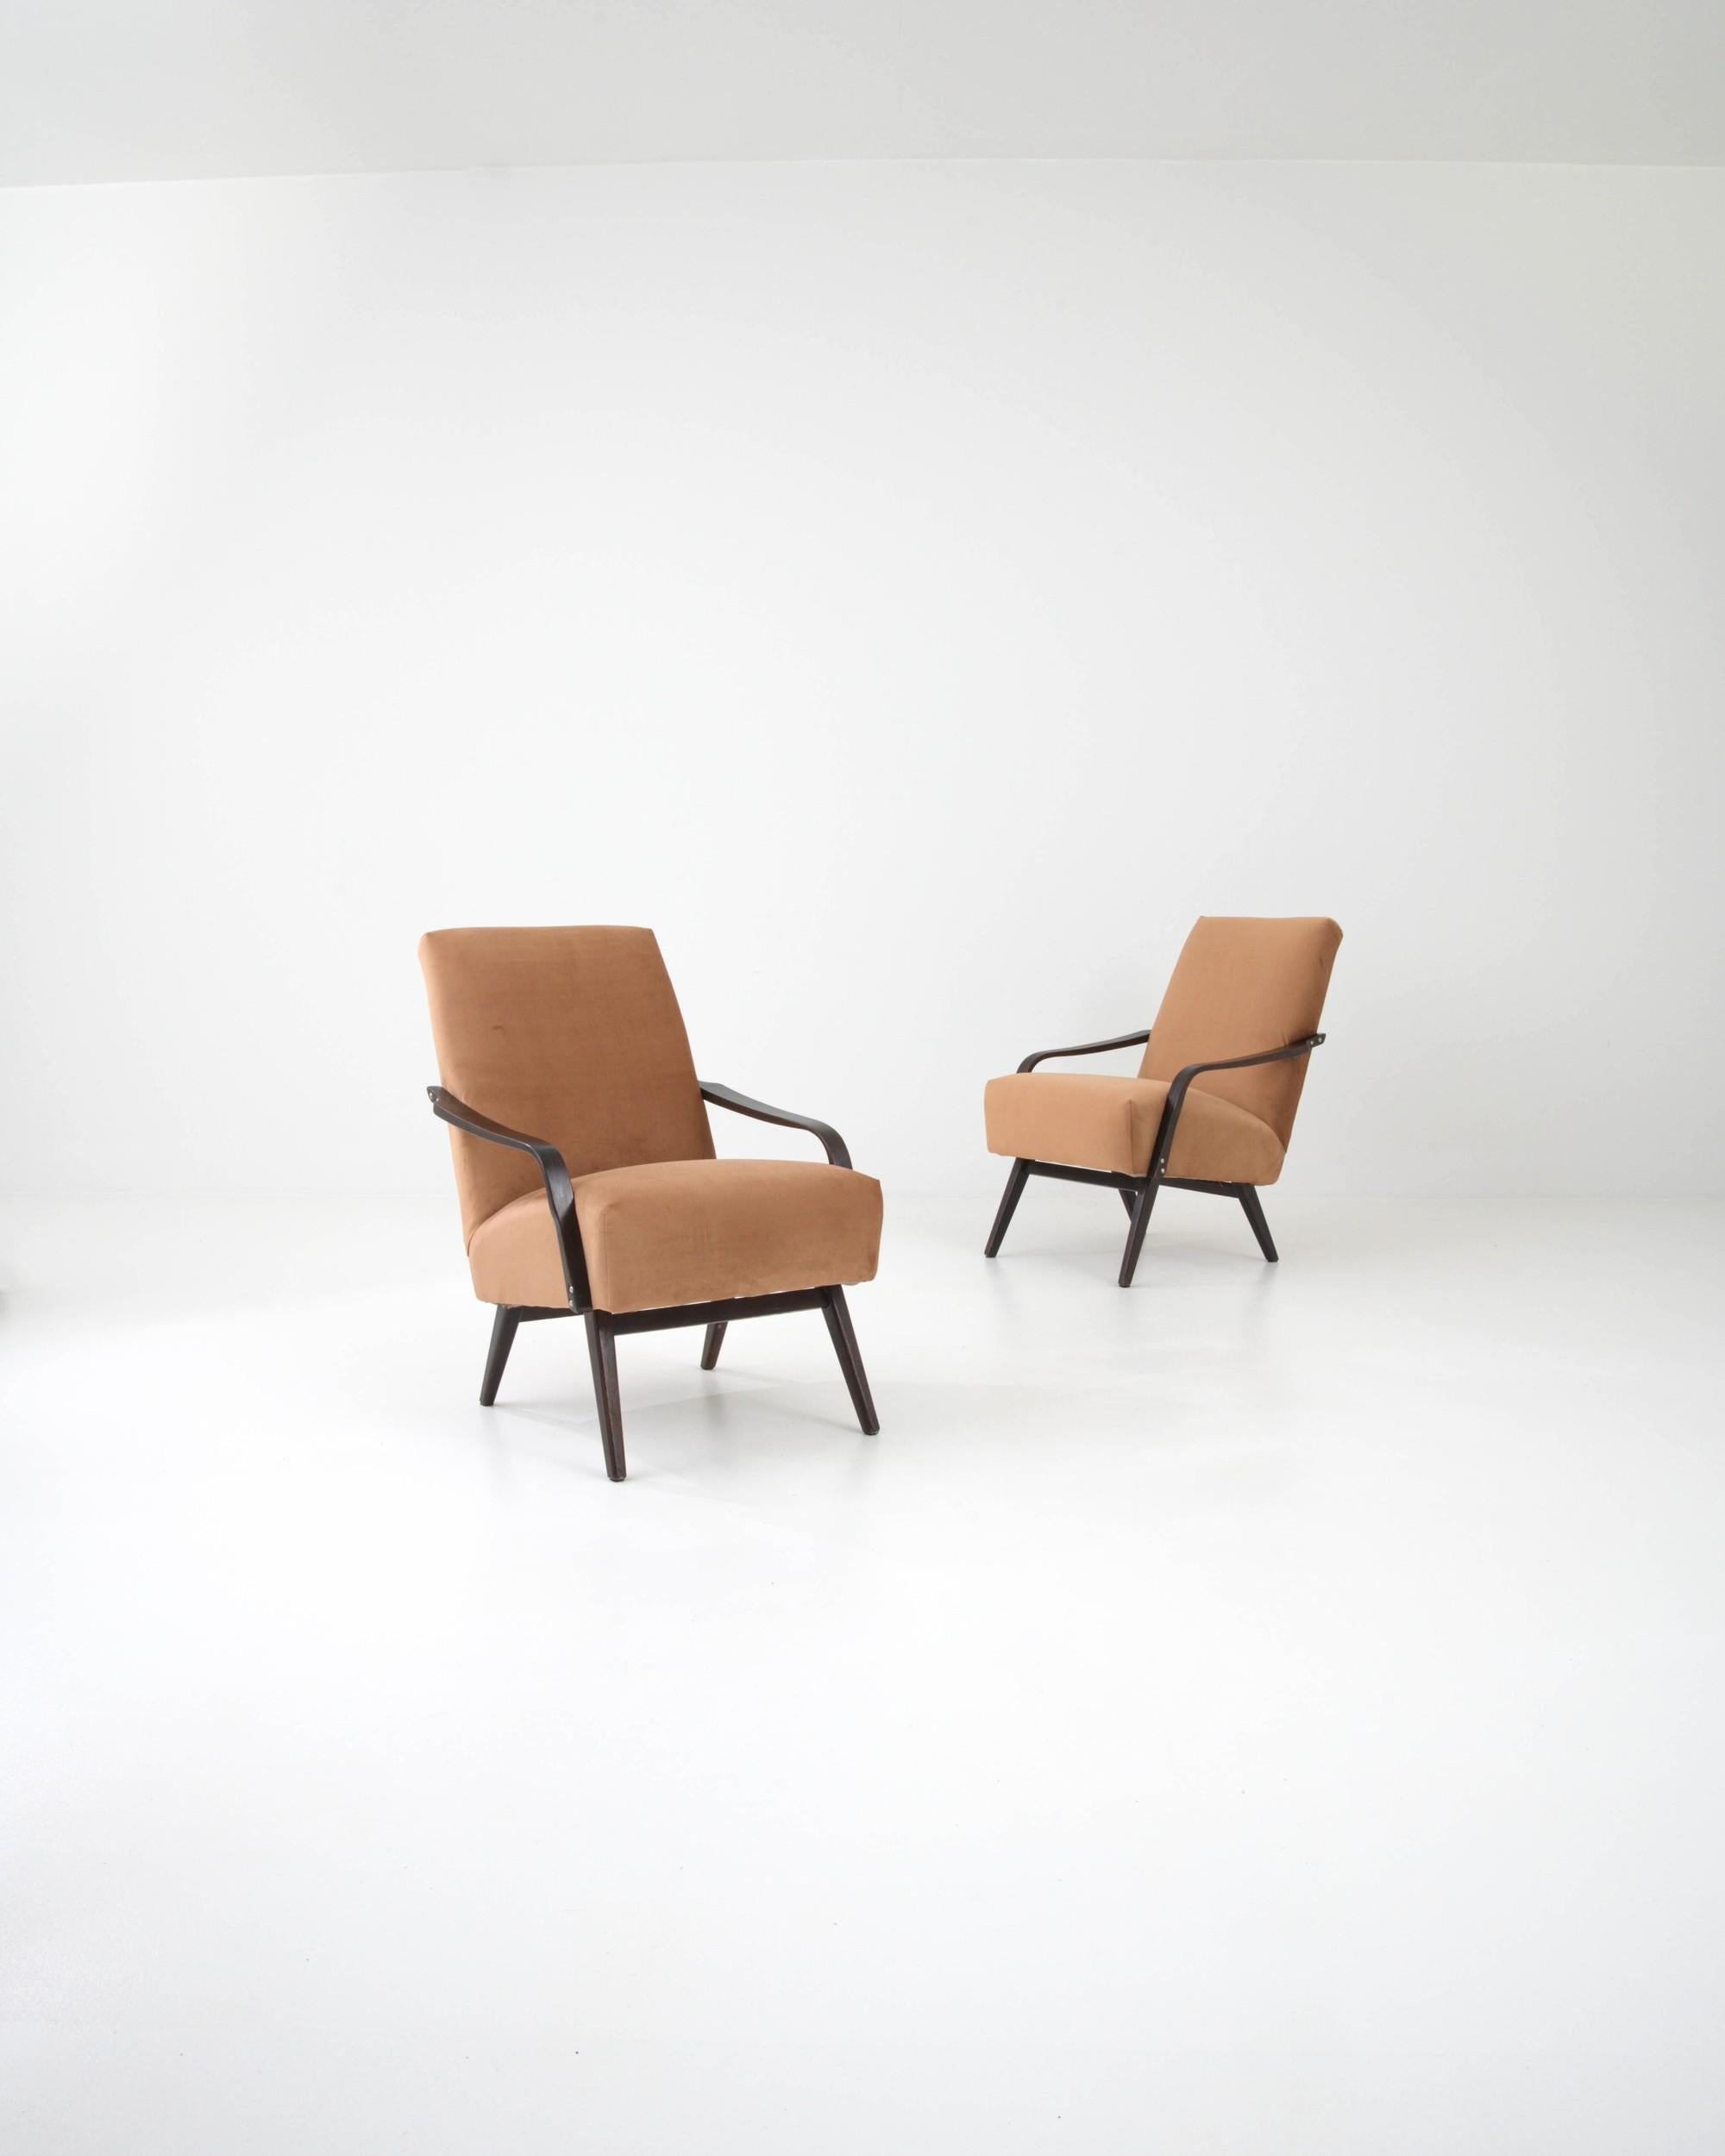 This beautiful pair of Mid-Century Modern armchairs were made in Czechia by renowned furniture manufacturers TON, design attributed to J. Smidek. Low-set and comfortable, a deep seat upholstered in soft boucle is set at a gentle recline. Sloping